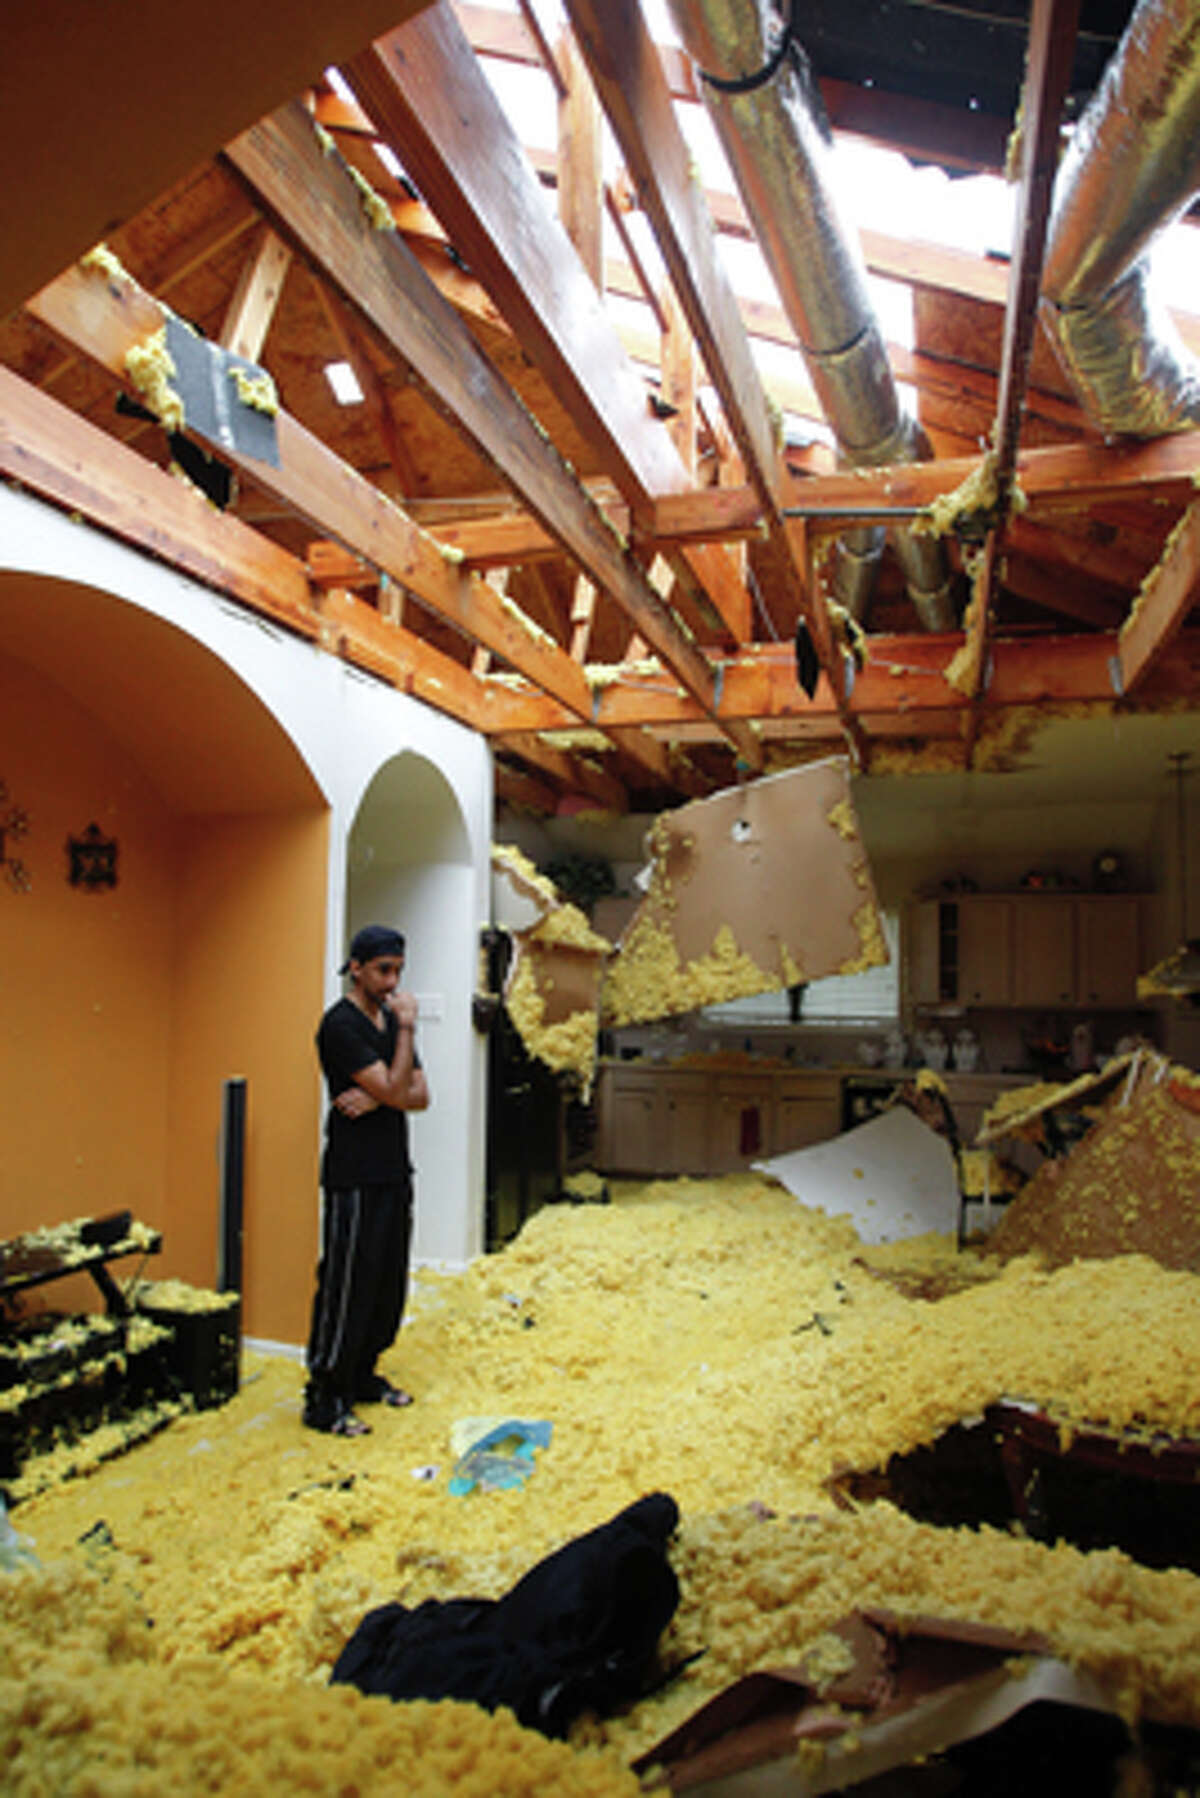 Umair Sayyed looks over damage by a possible tornado inside the home where his he lives with his family in the 15000 block of Turphin Way Monday, Jan. 9, 2012, near Sugar Land.